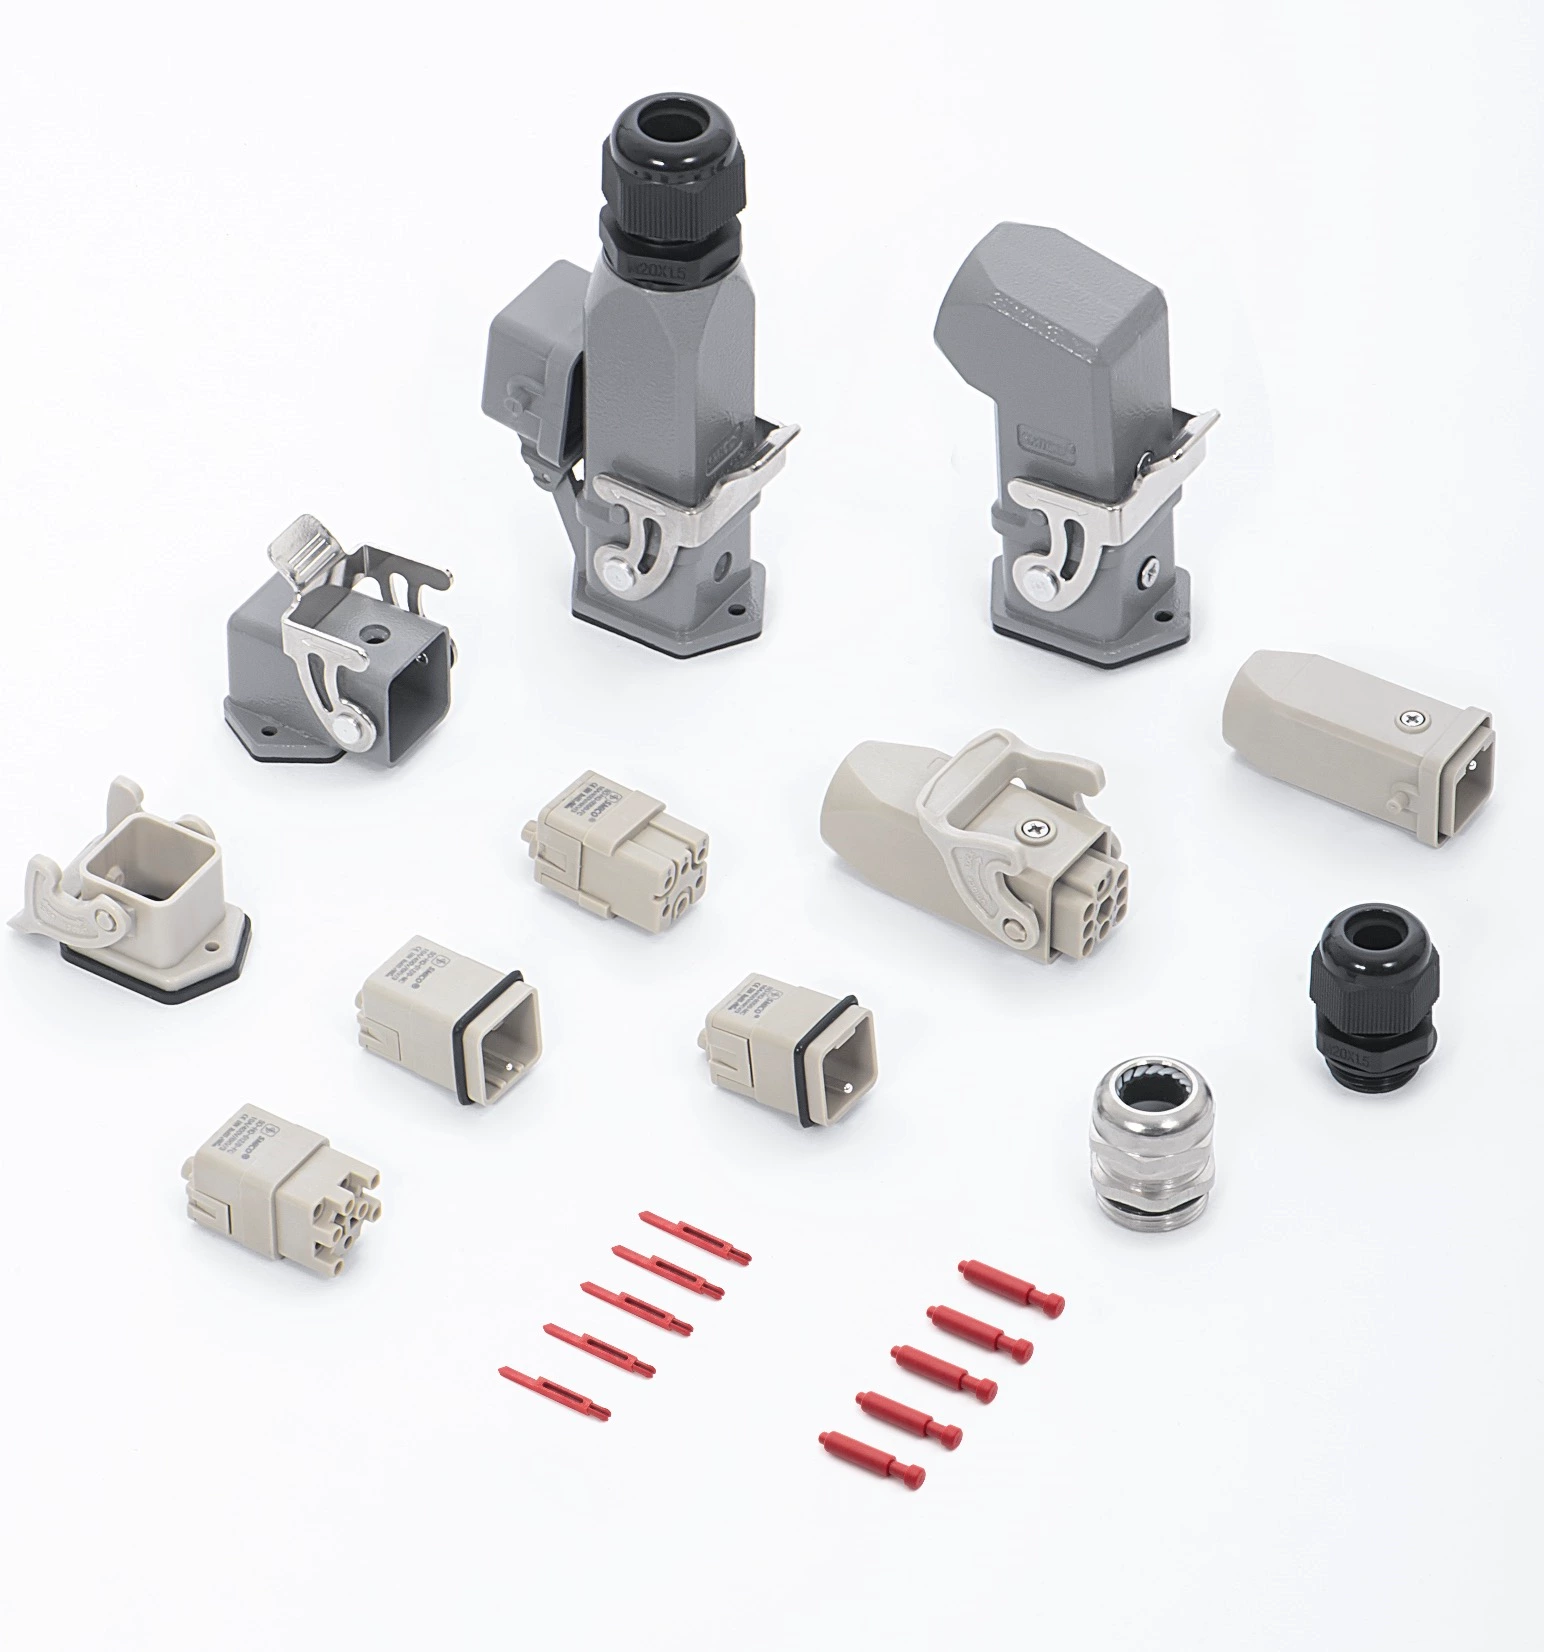 Reliable connection丨Heavy-duty connectors are widely used in industrial automation